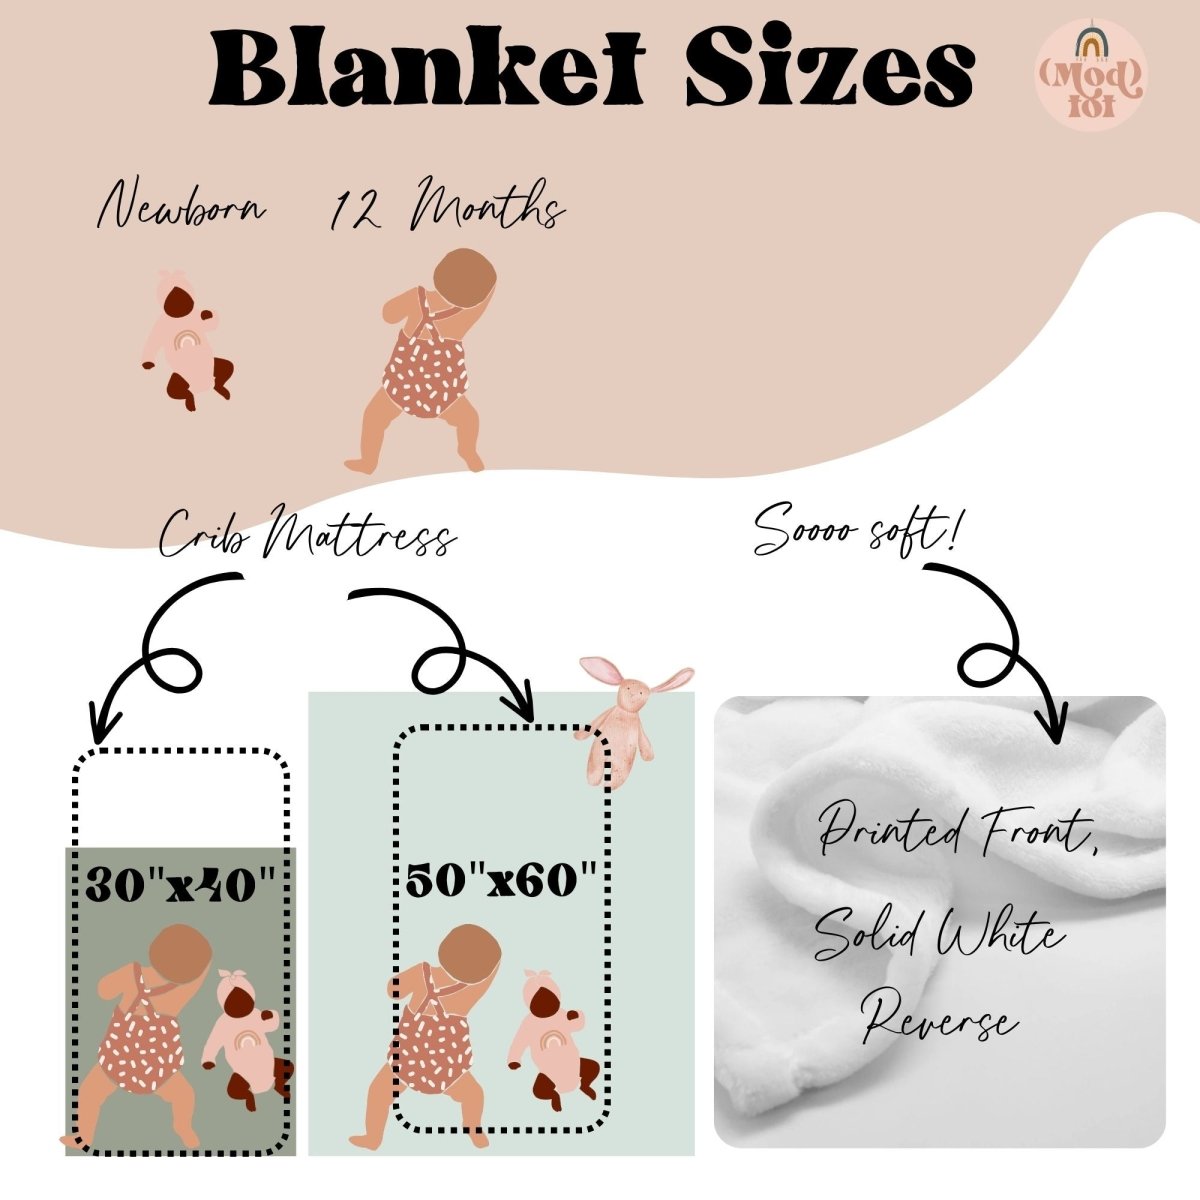 Woodland Floral Adventure Patchwork Minky Blanket - gender_girl, Personalized_No, Theme_Adventure